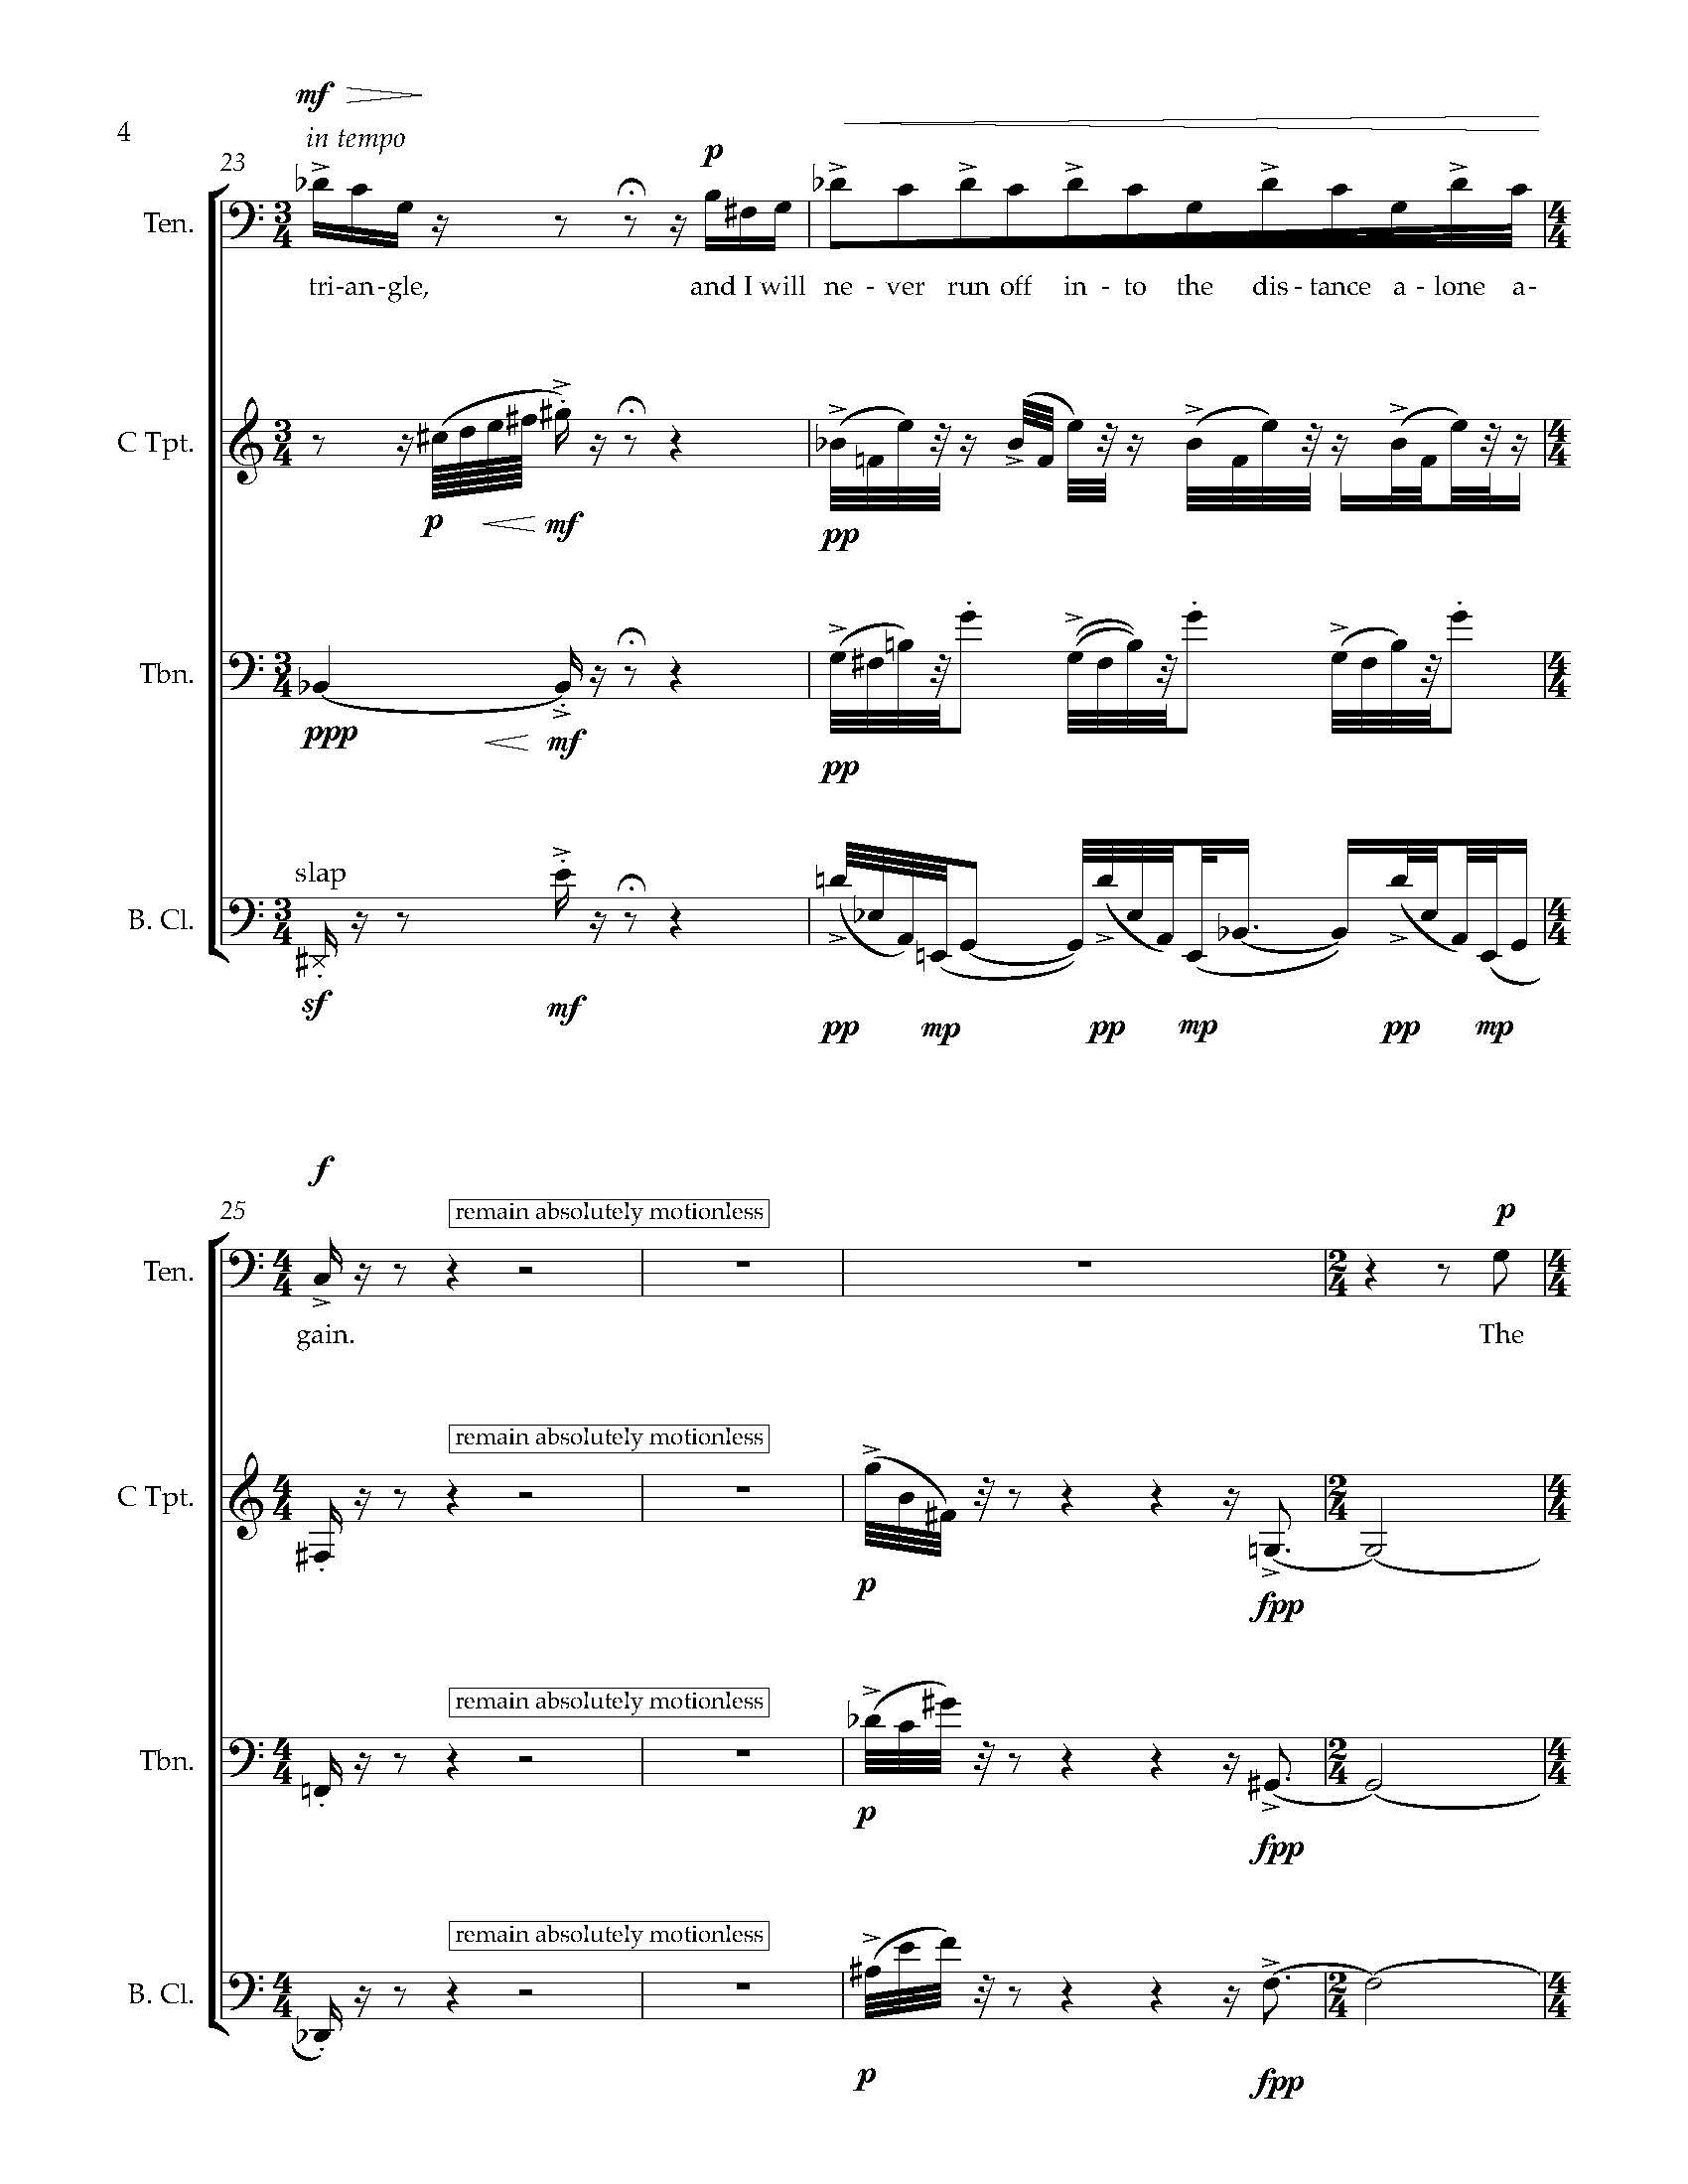 Many Worlds [1] - Complete Score_Page_13.jpg